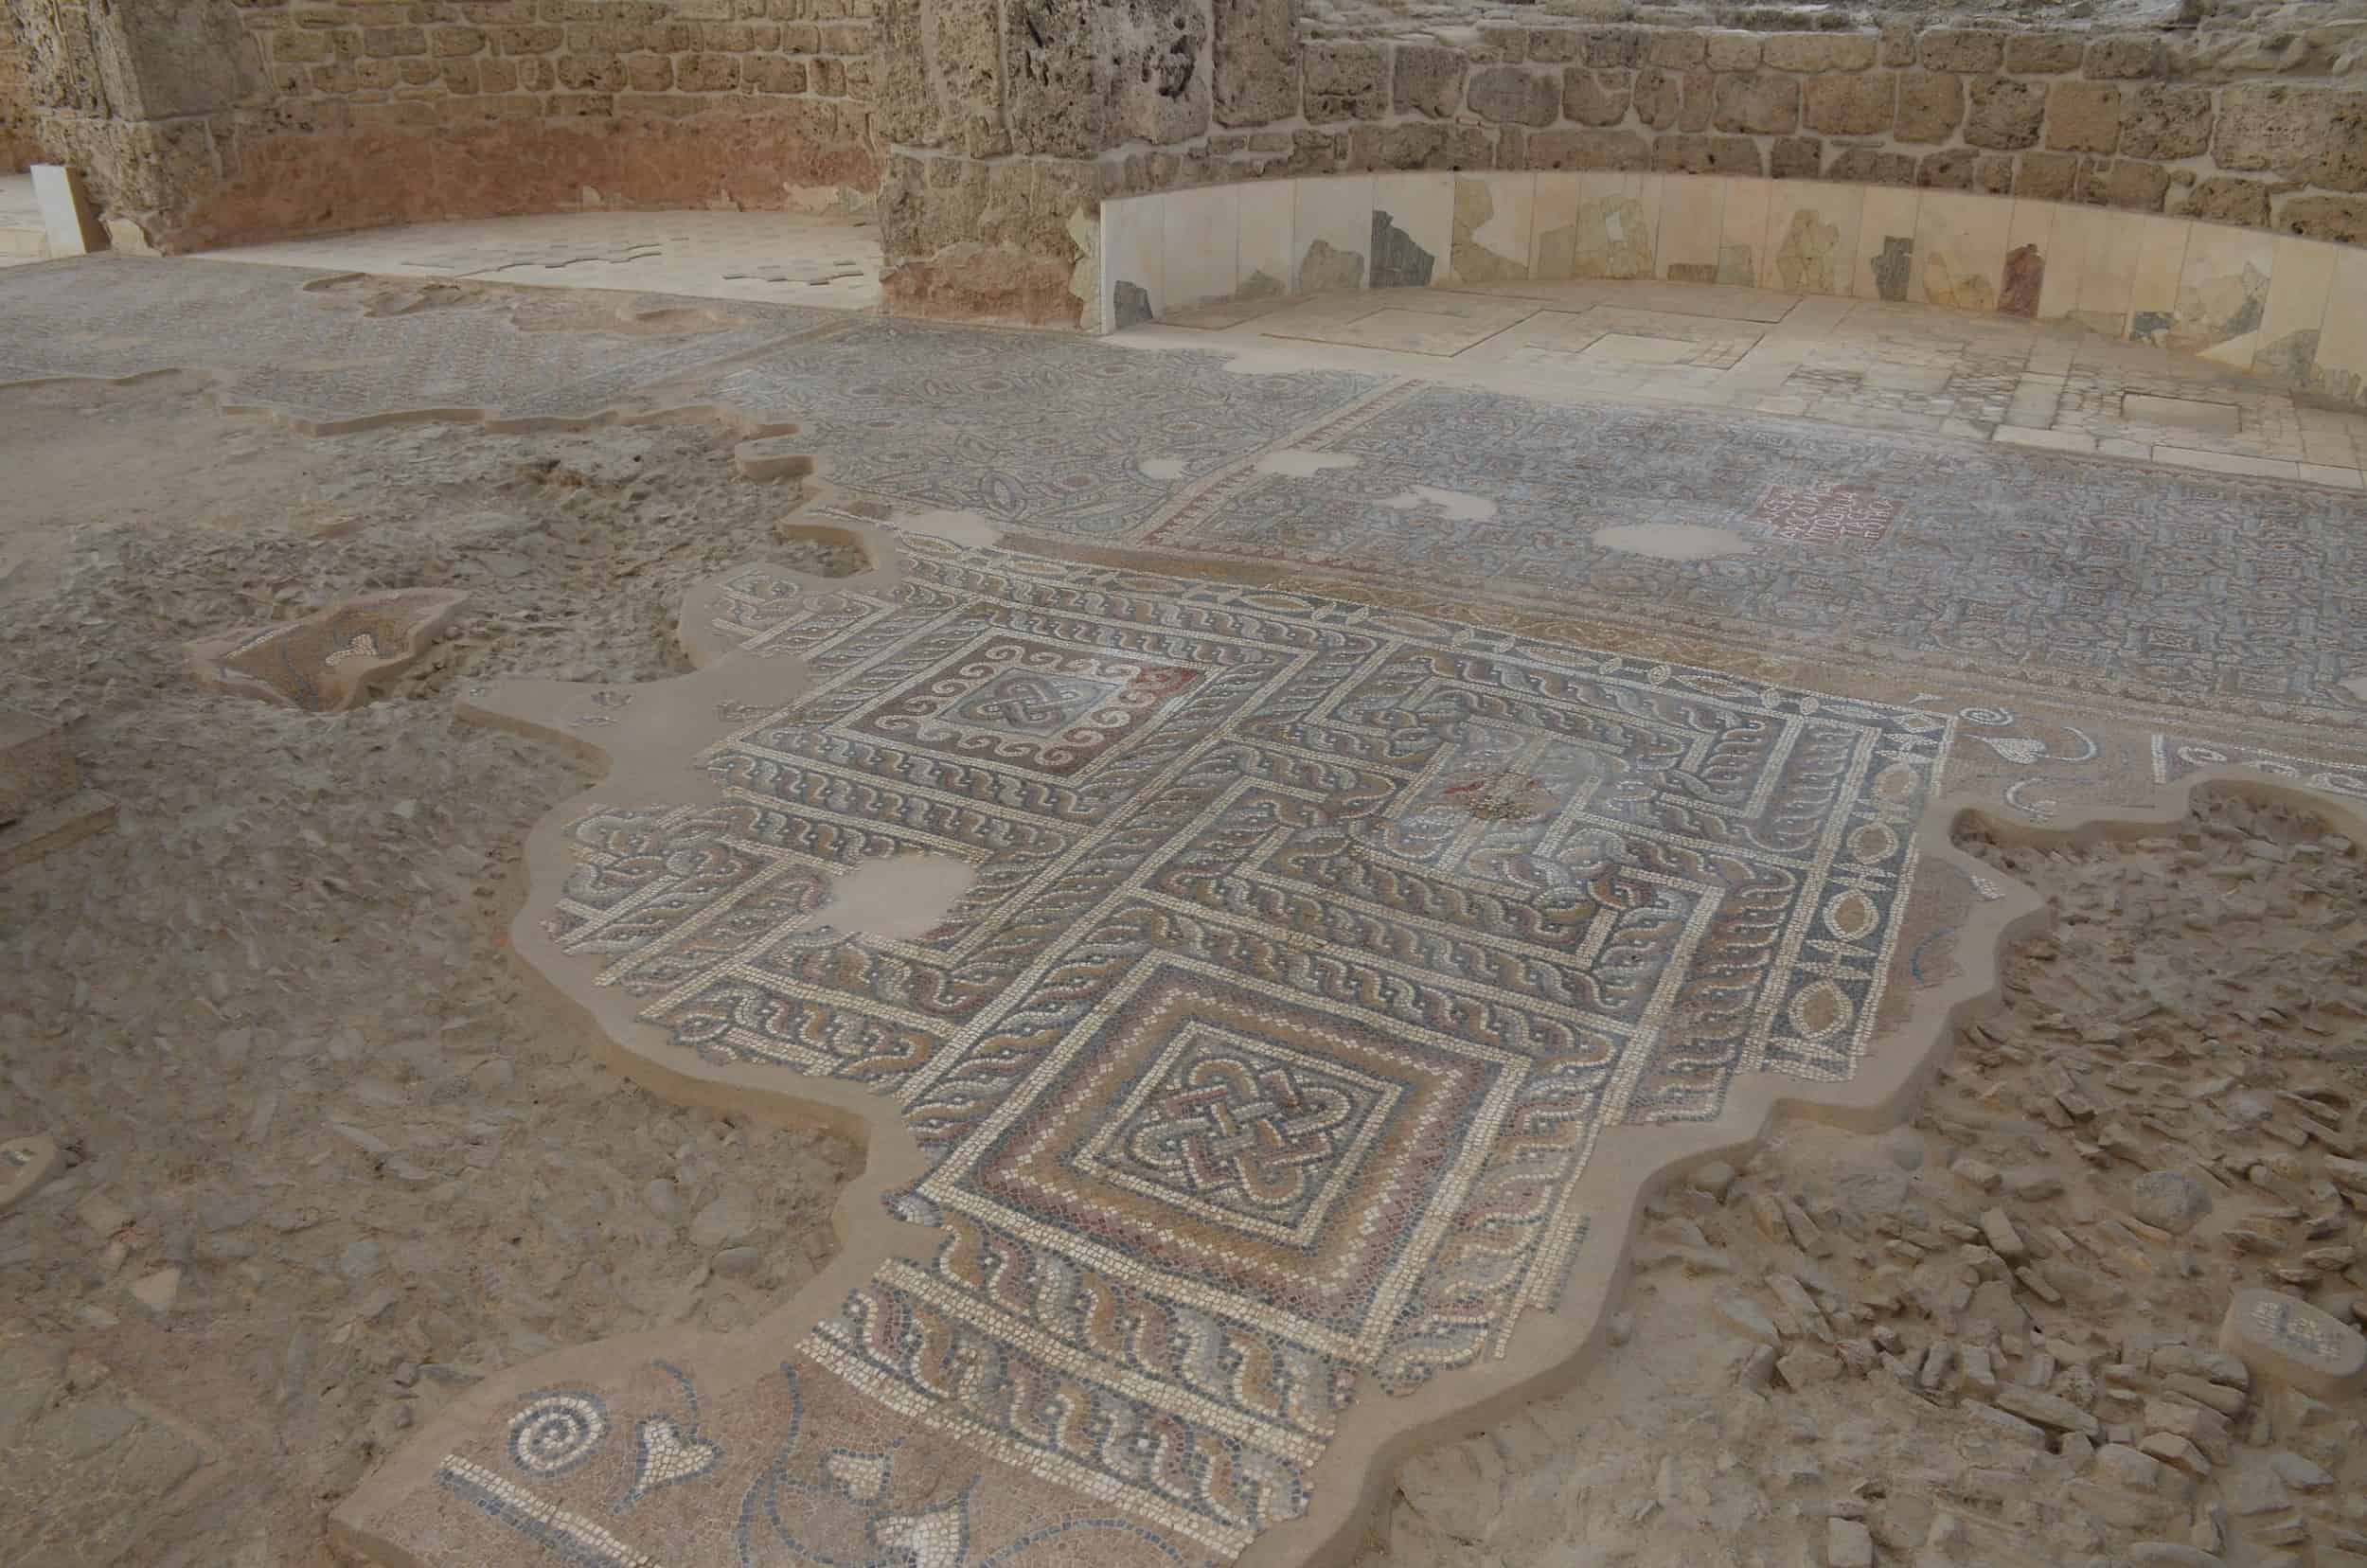 Mosaic floor in the south aisle at the Church of Laodicea